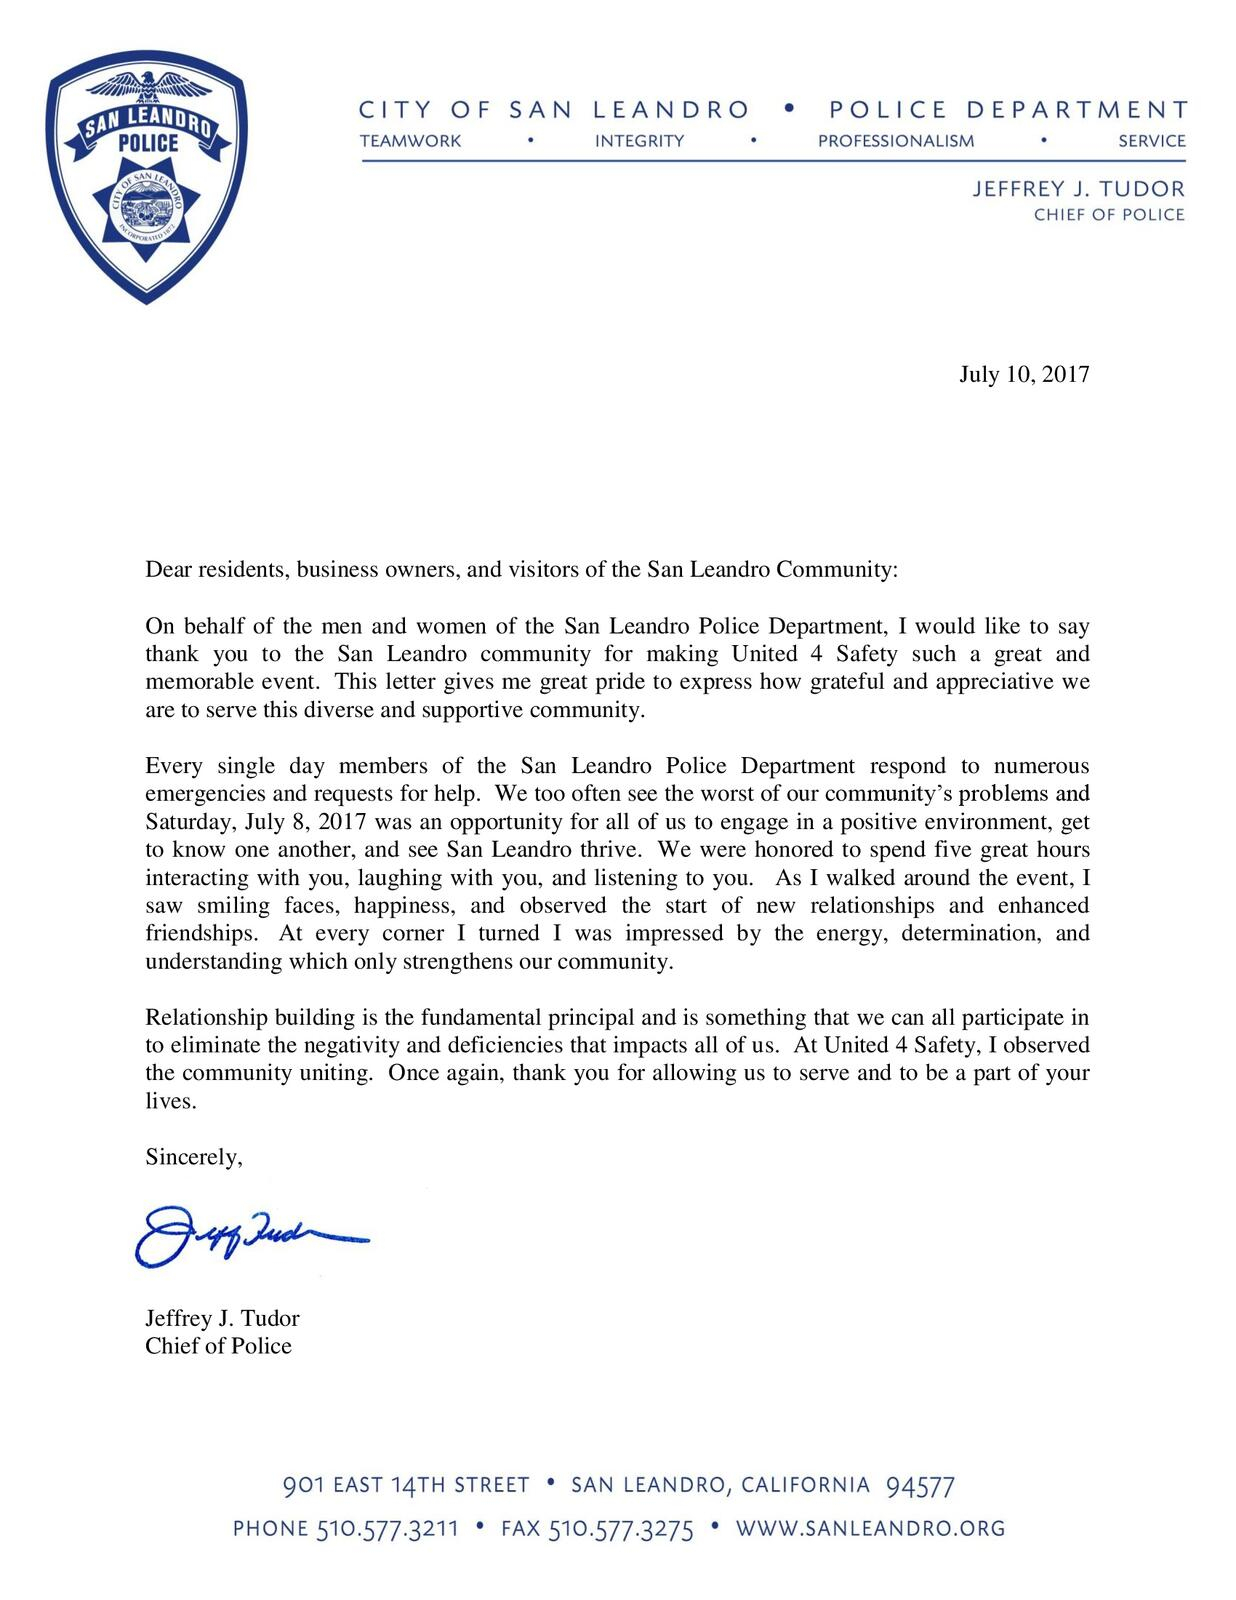 Thank You Letter From Police Chief Jeff Tudor San Leandro within sizing 1236 X 1600